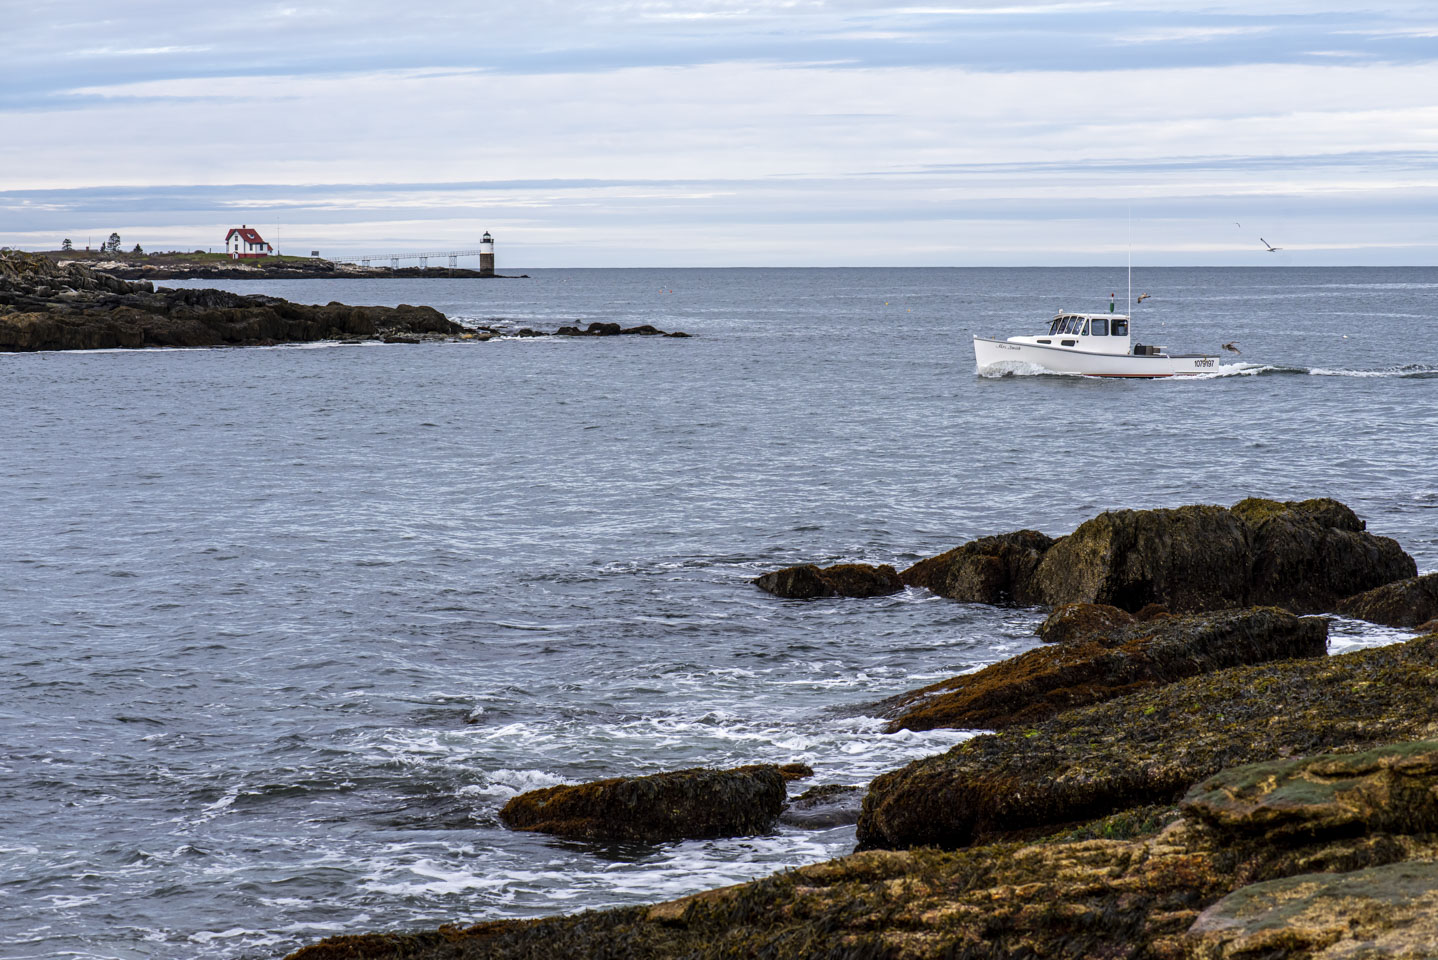 Ram Island Lighthouse and the lobster boat Mrs. Smith